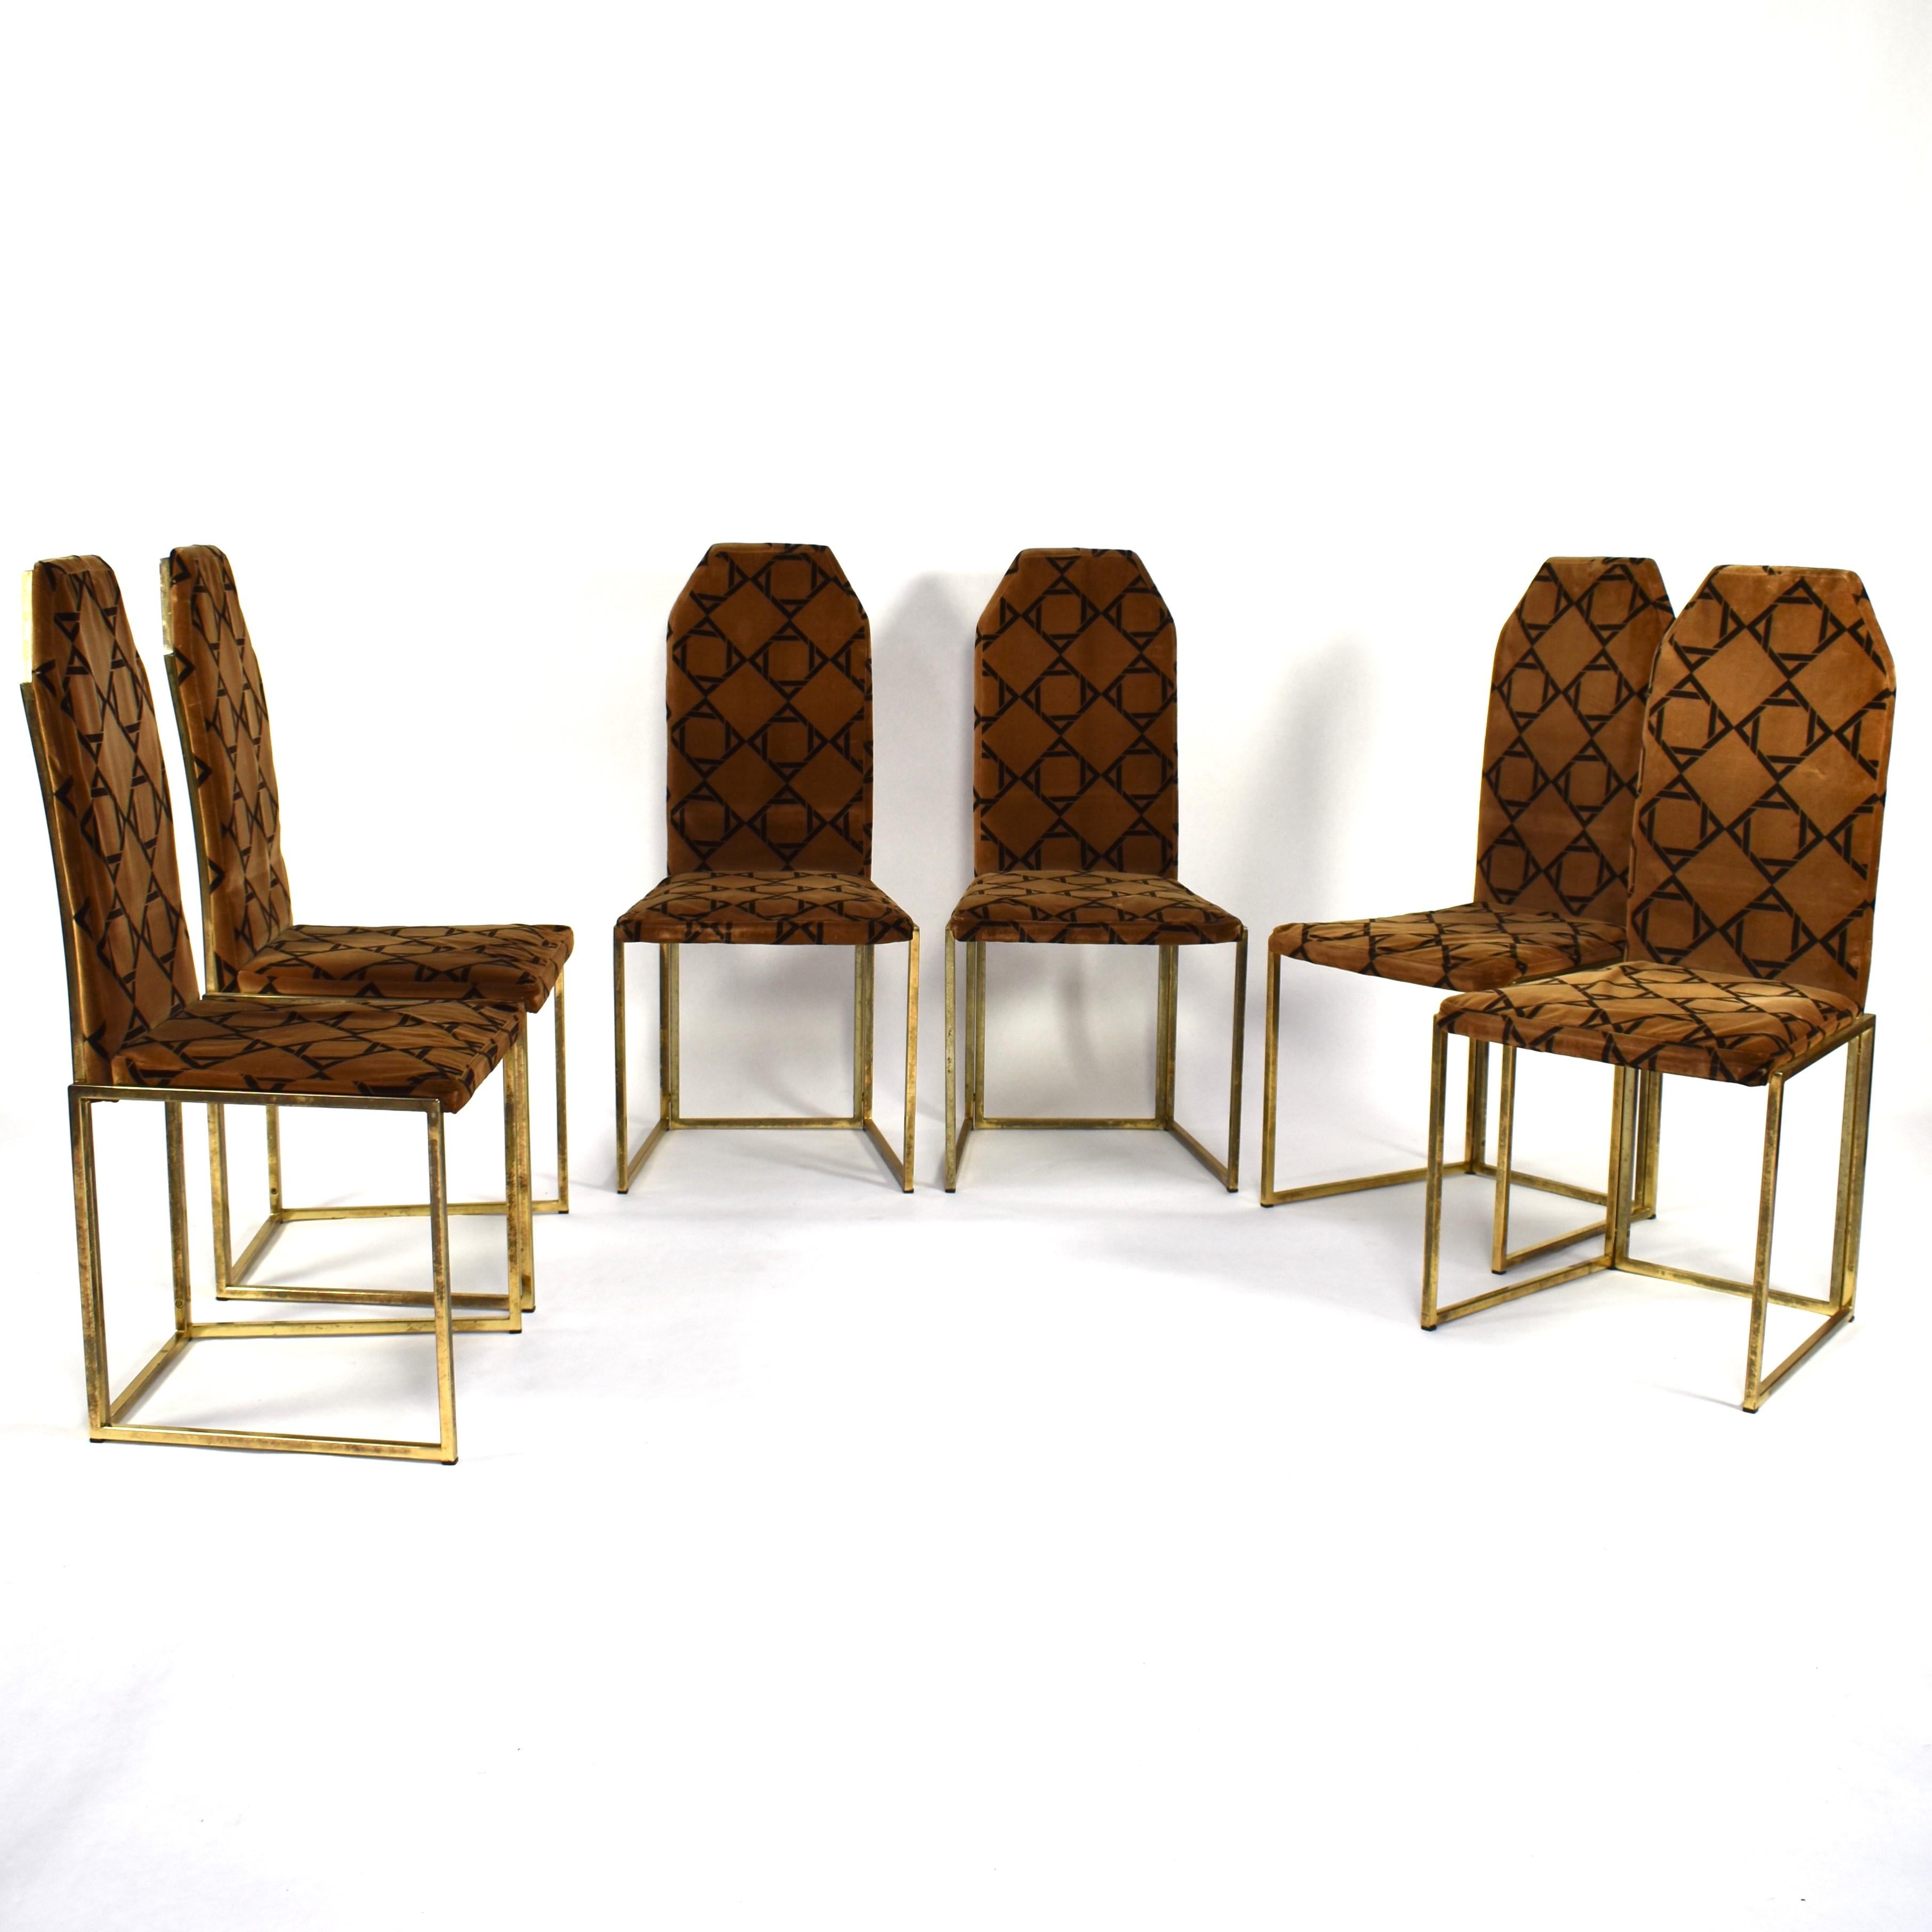 Set of six Willy Rizzo style dining chairs. The chairs have a gold brass metal base with a brown velvet fabric (still original). 

Country: Italy 

Model: Dining chairs

Material: Metal / Velvet fabric

Design period: 1970s

Date of